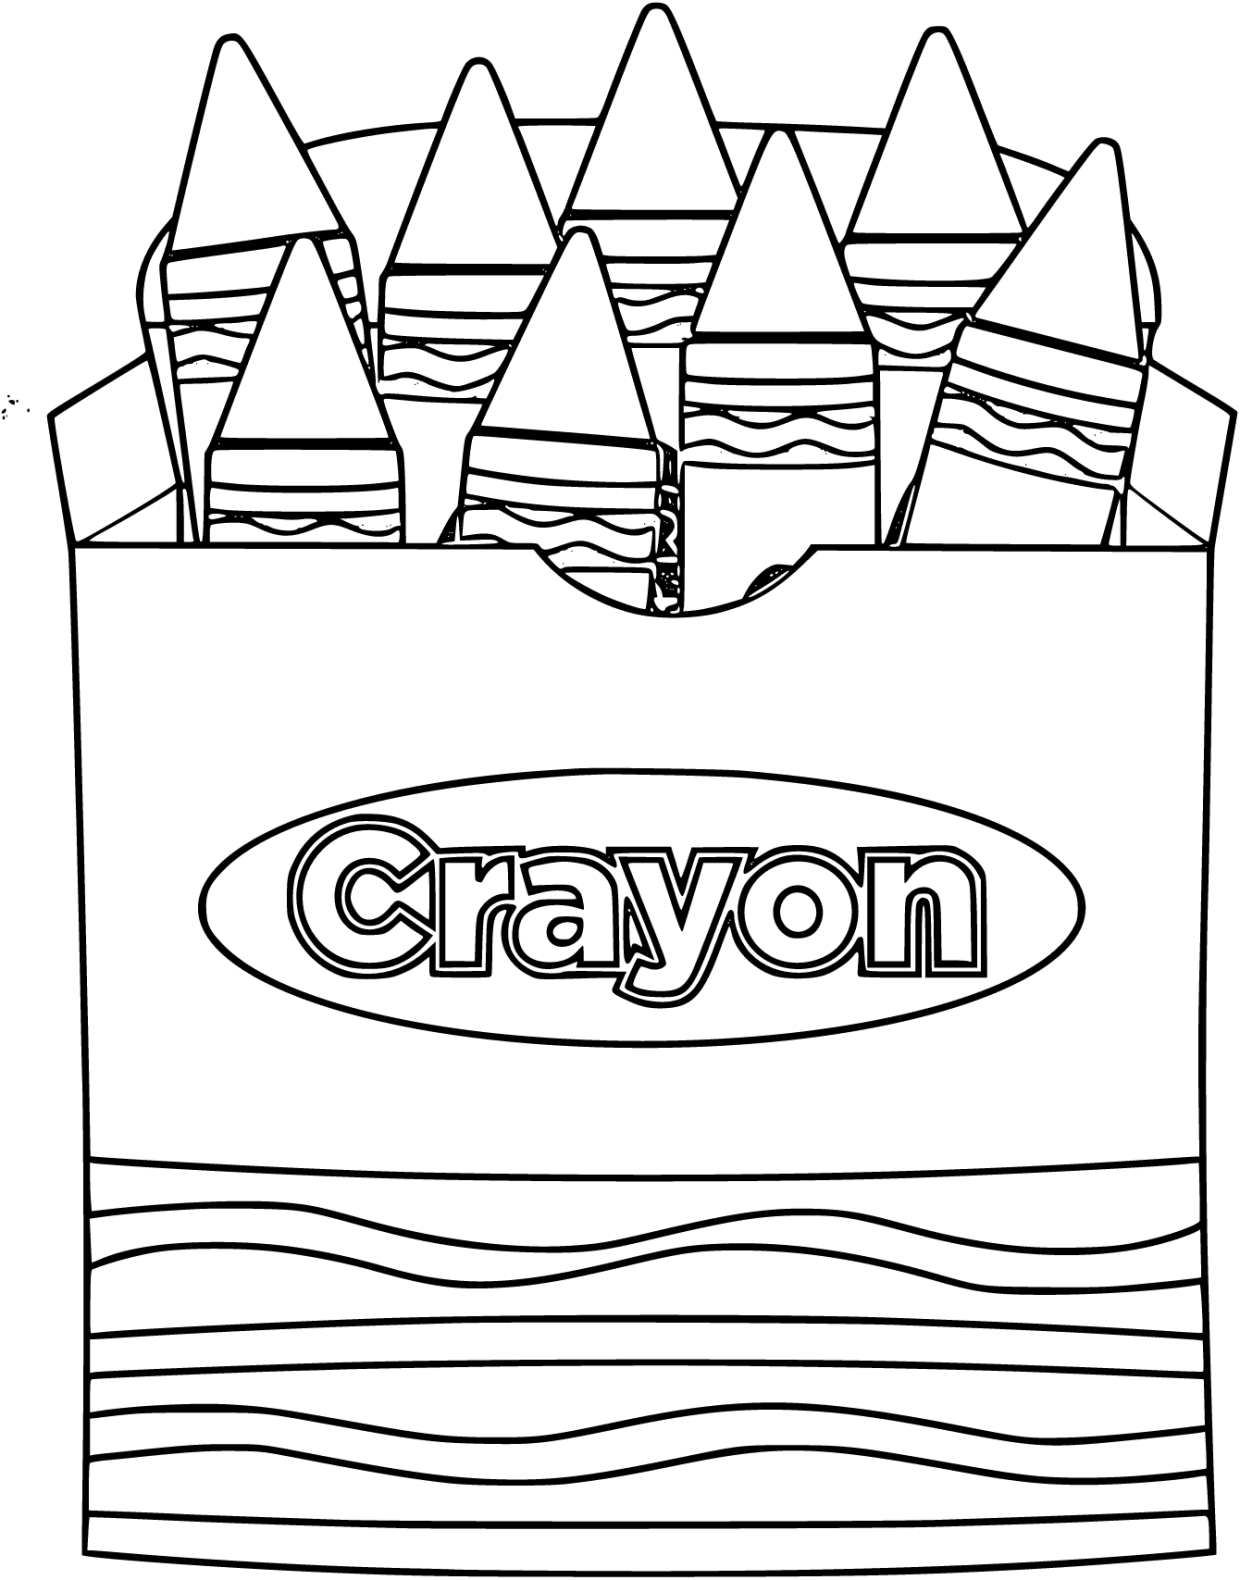 Printable Crayon Coloring Pages Free For Kids And Adults